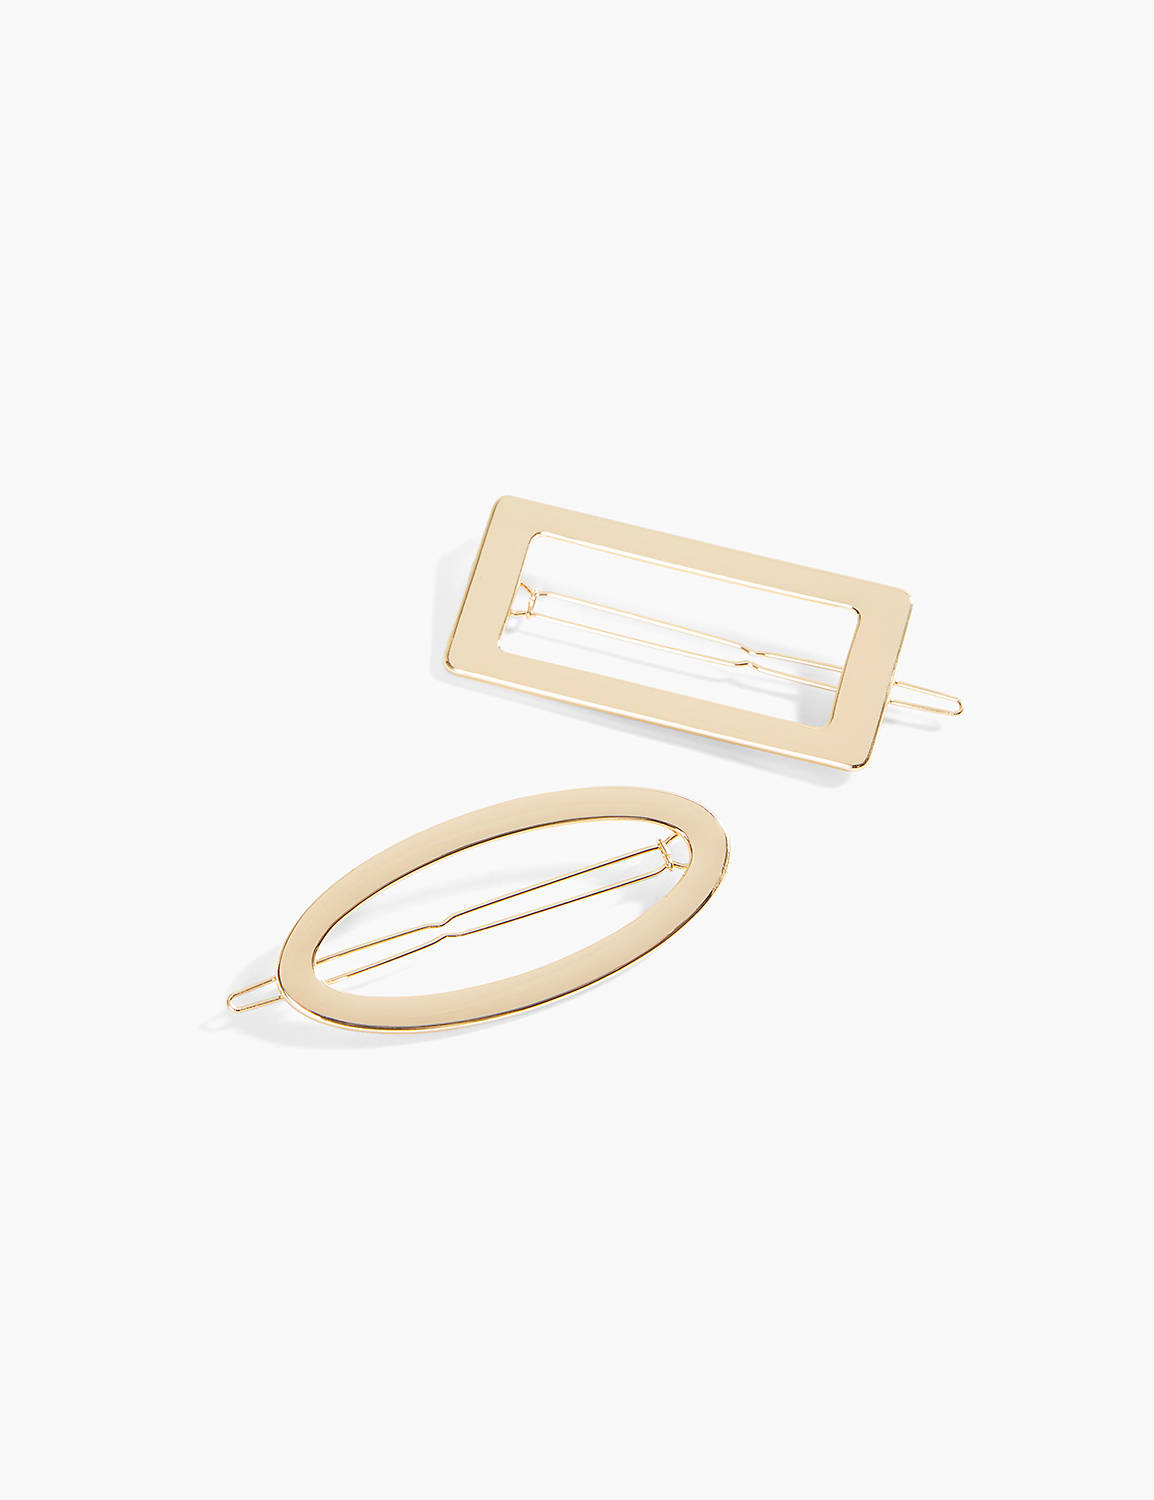 GOLD OPEN GEO CLIPS Product Image 1